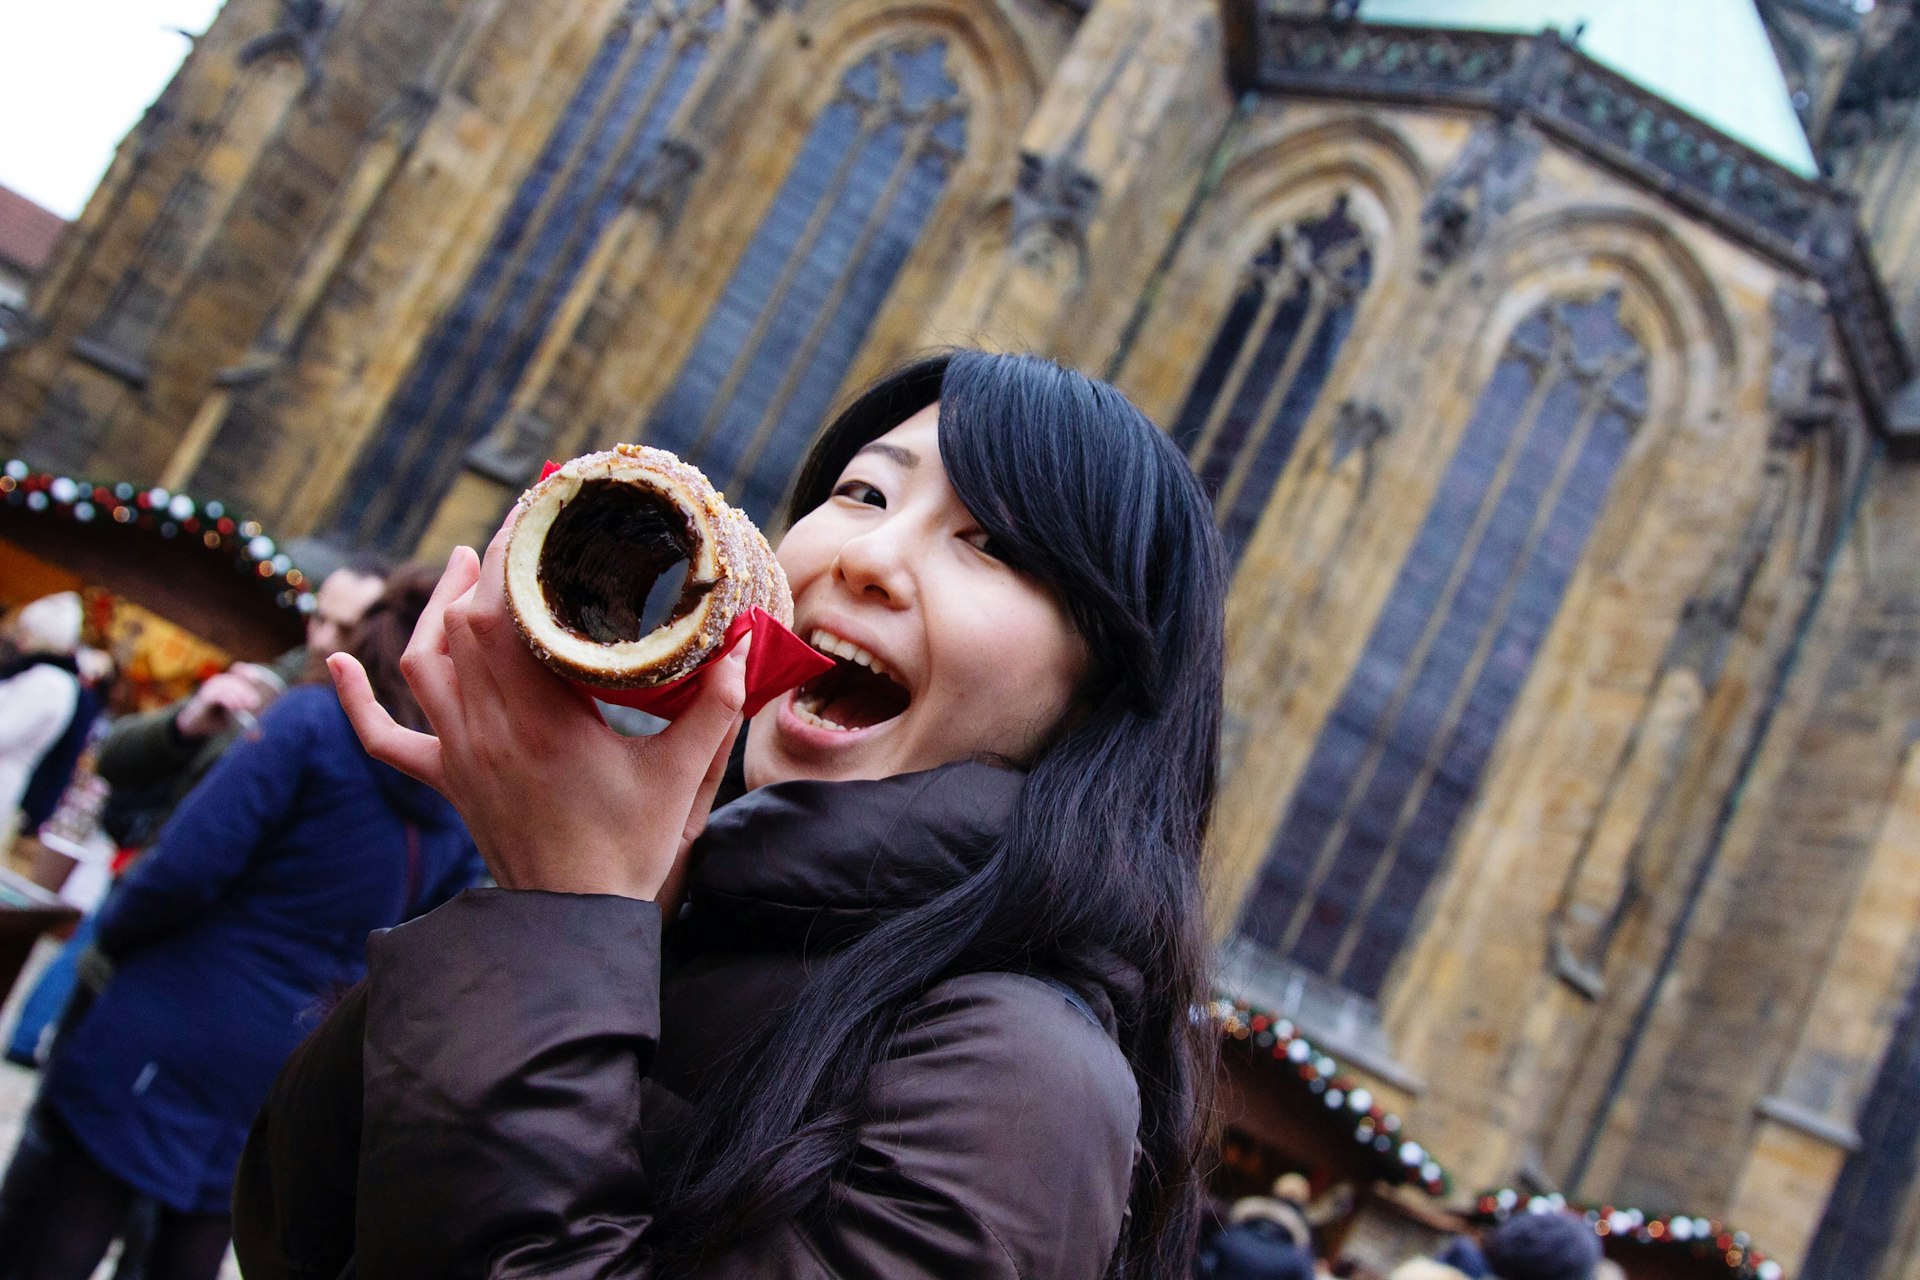 A woman smiles as she tucks into a pastry